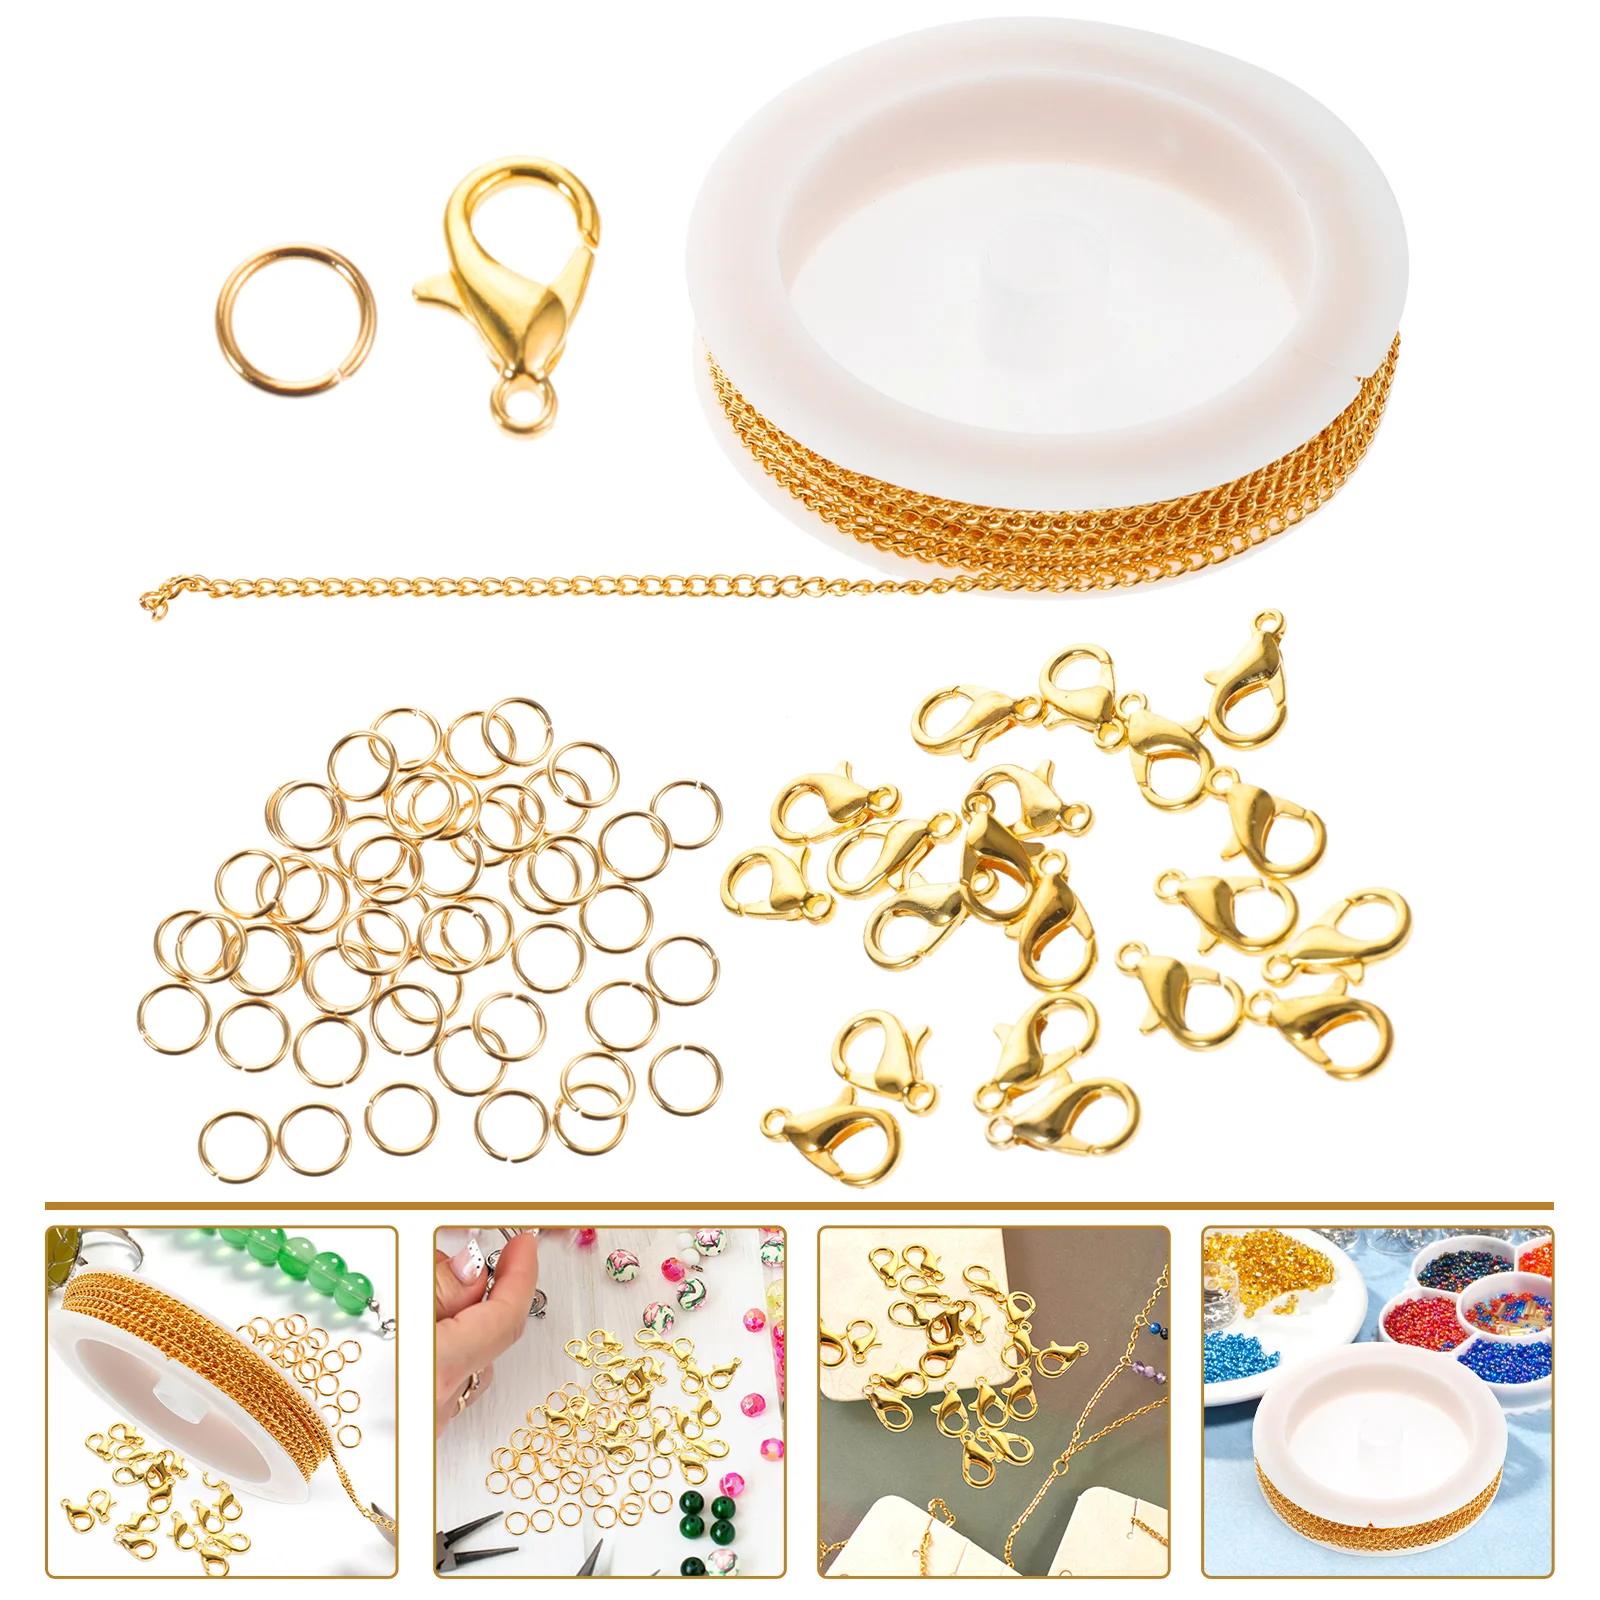 

Bracelet Necklace Tools Jewelry Making Kit DIY Chains The Craft Iron Lobster Clasps Delicate Open Rings